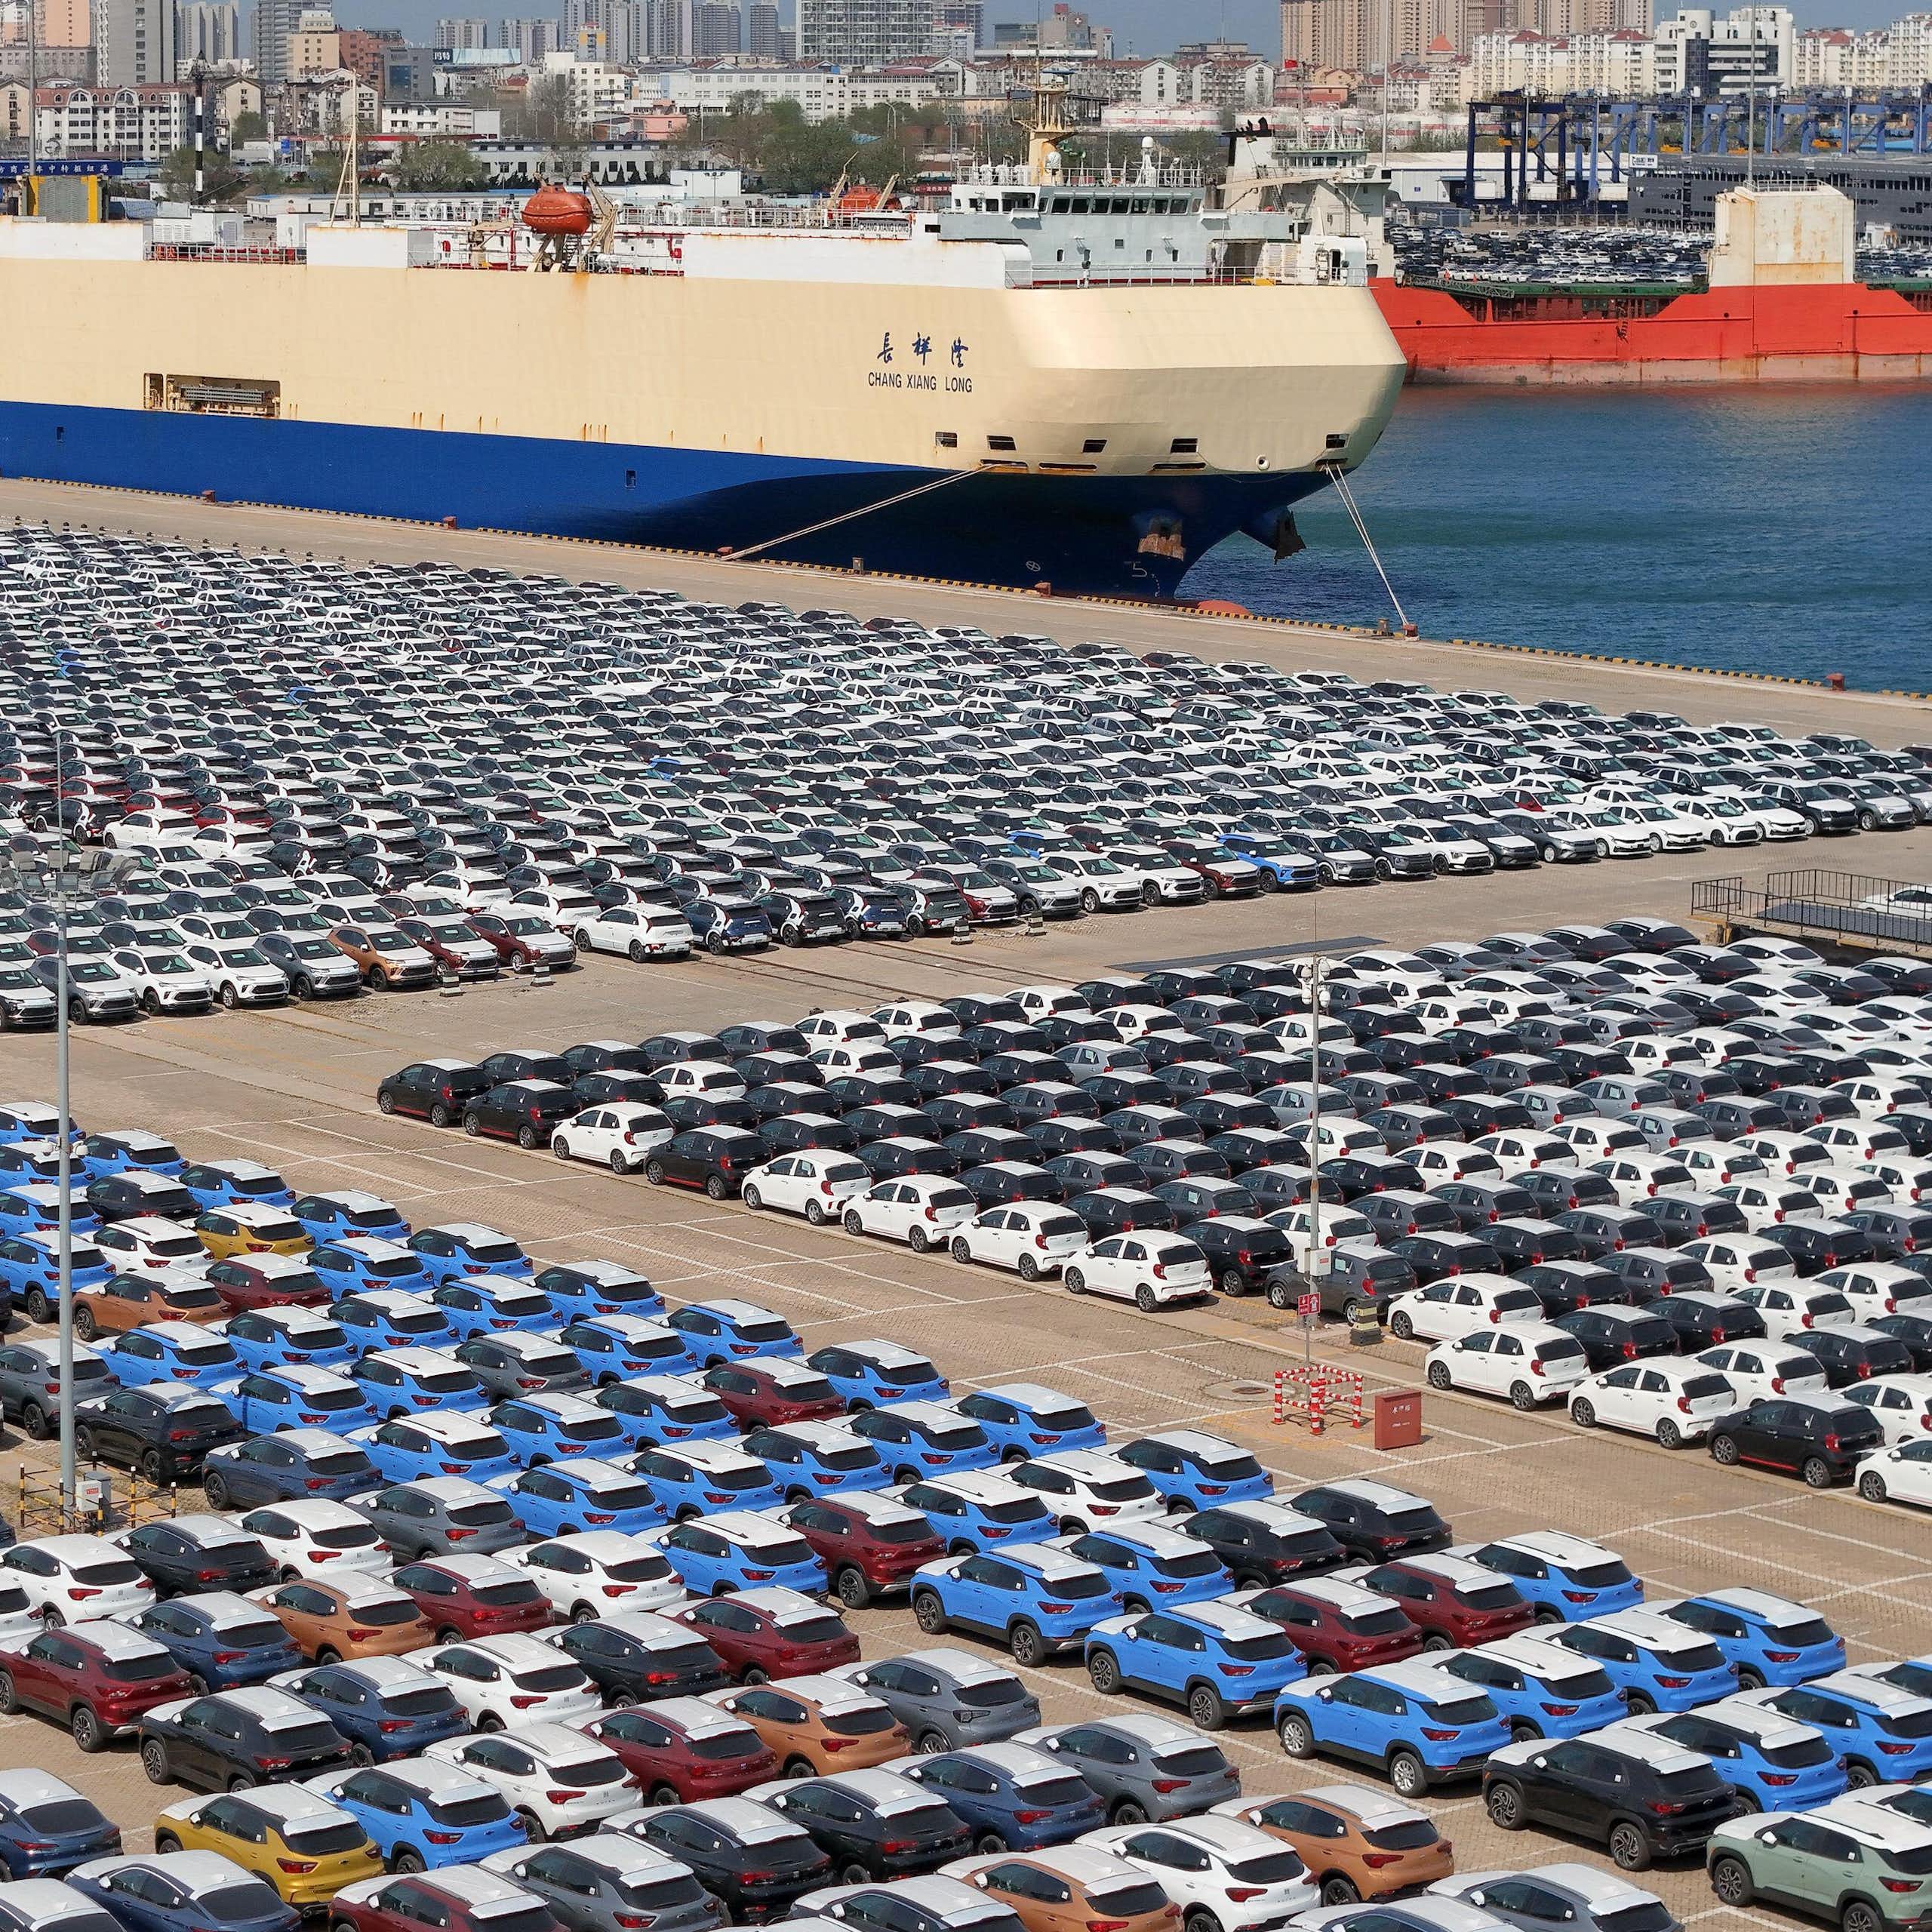 A port car park full of cars waiting to be loaded onto cargo ships.